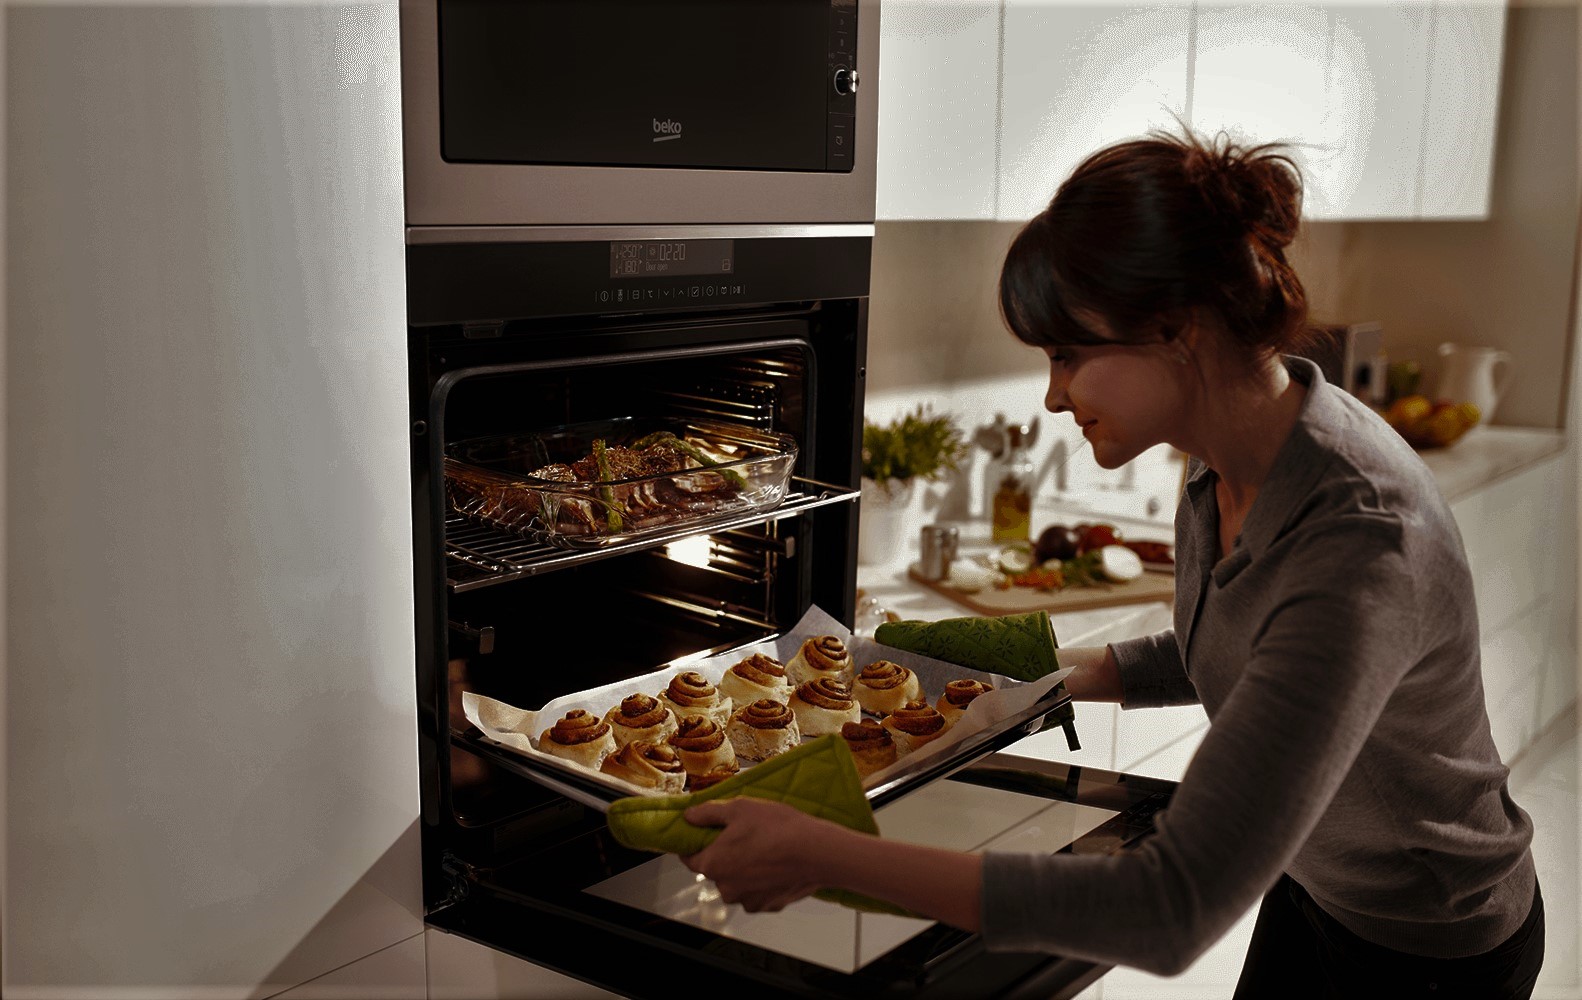 The Benefits of Owning A Beko Split&Cook Oven